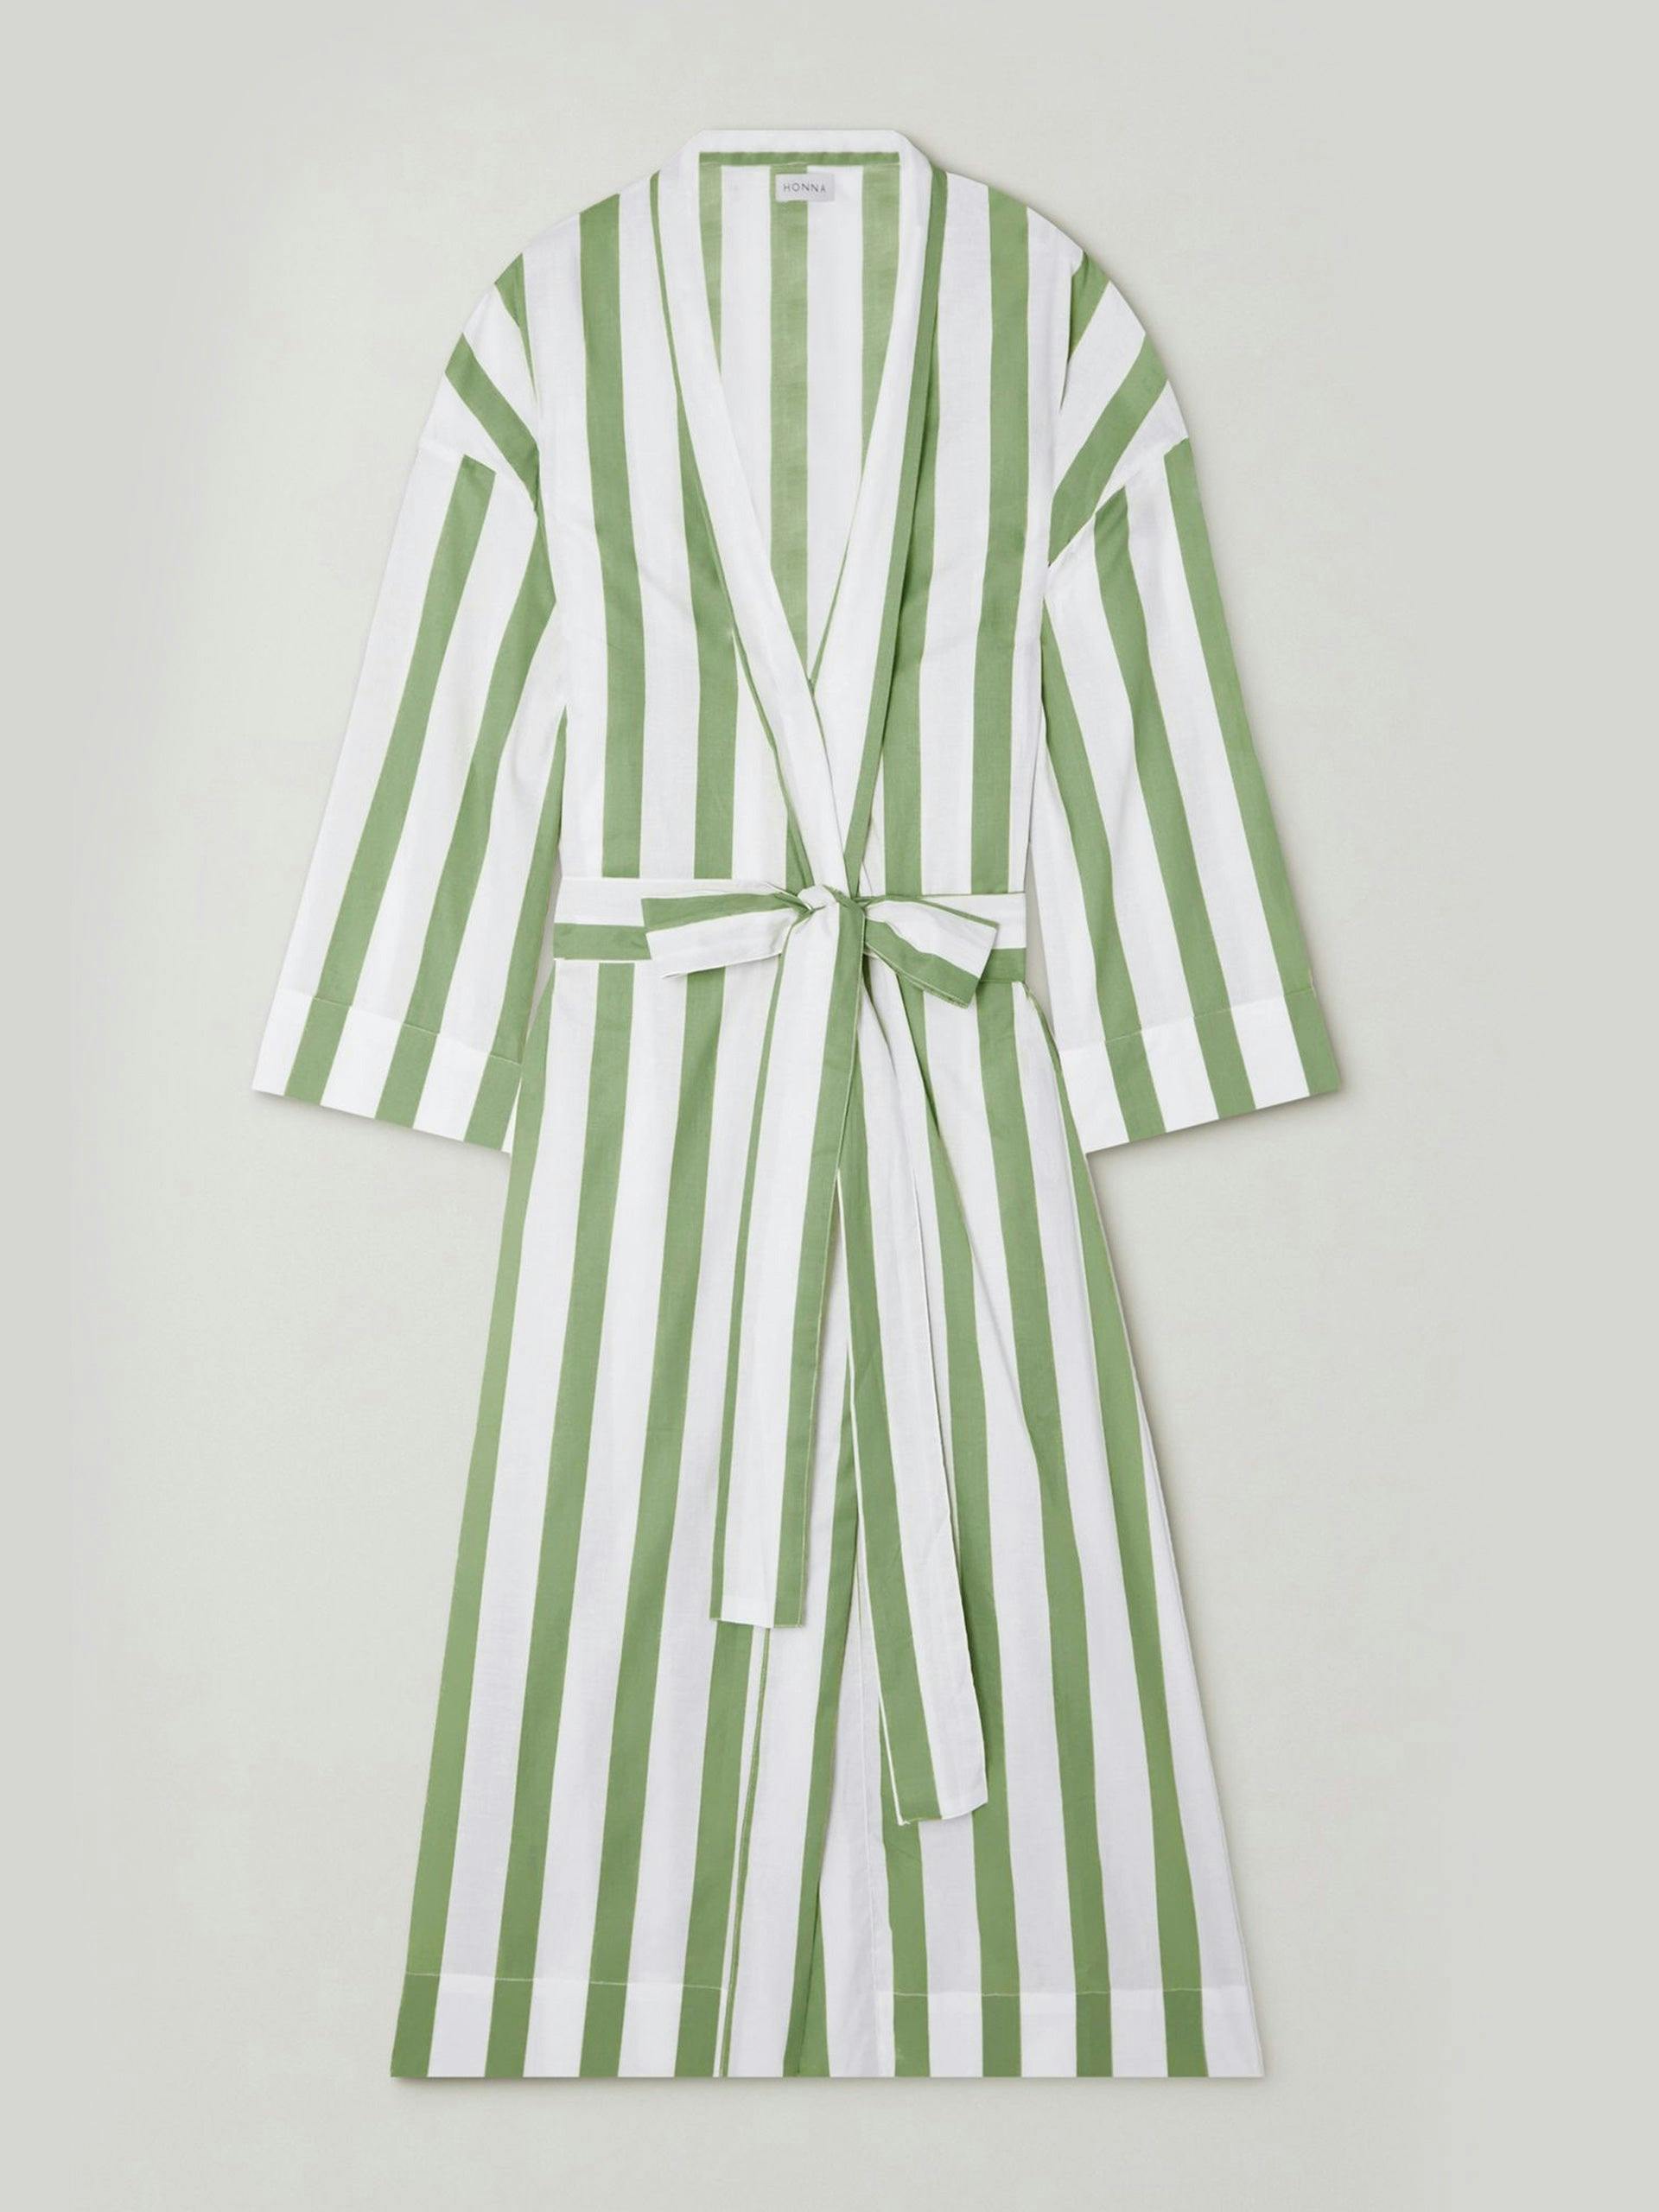 Green and white striped dressing gown